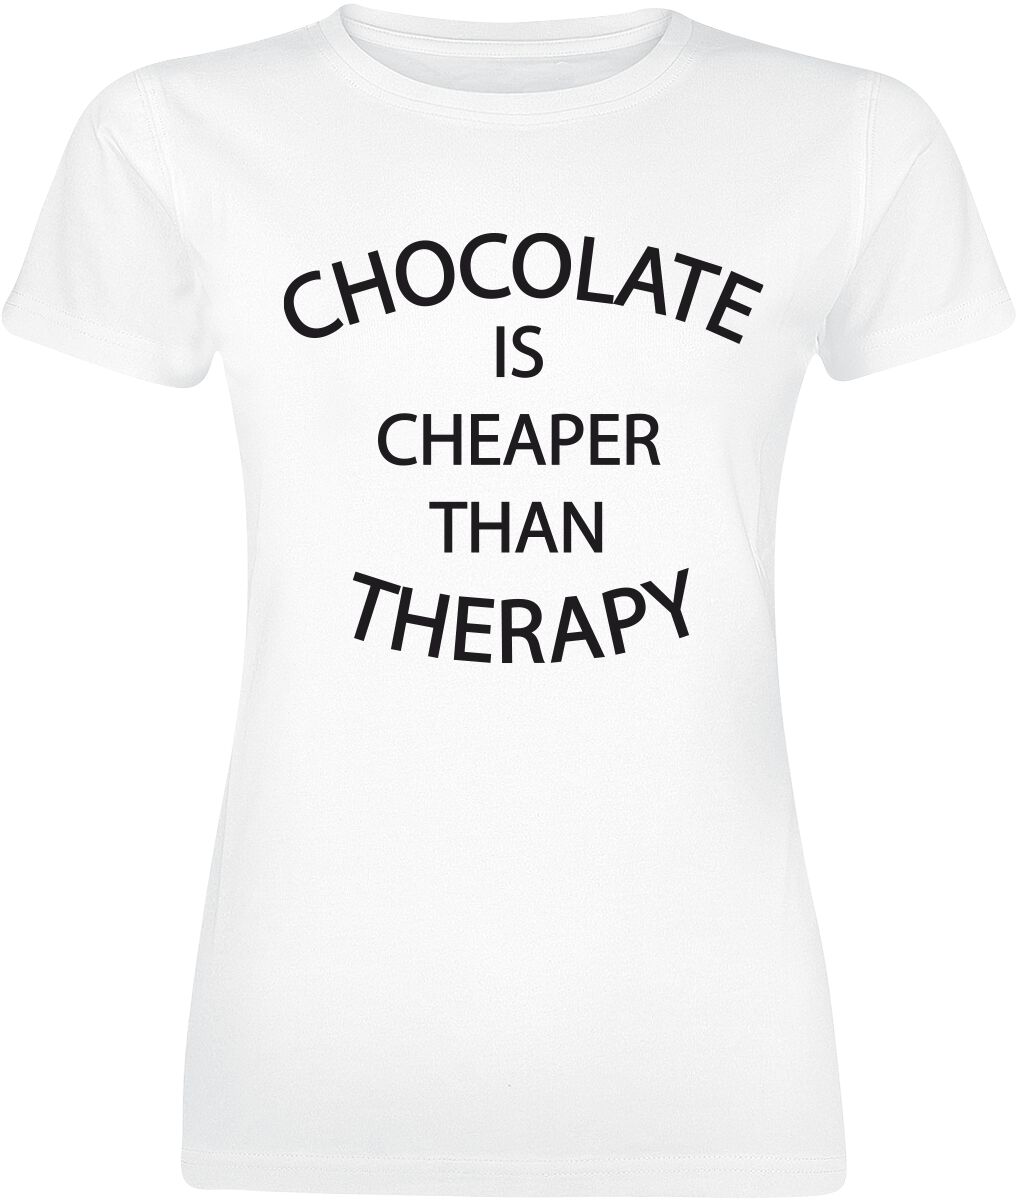 Food Chocolate Is Cheaper Than Therapy T-Shirt white